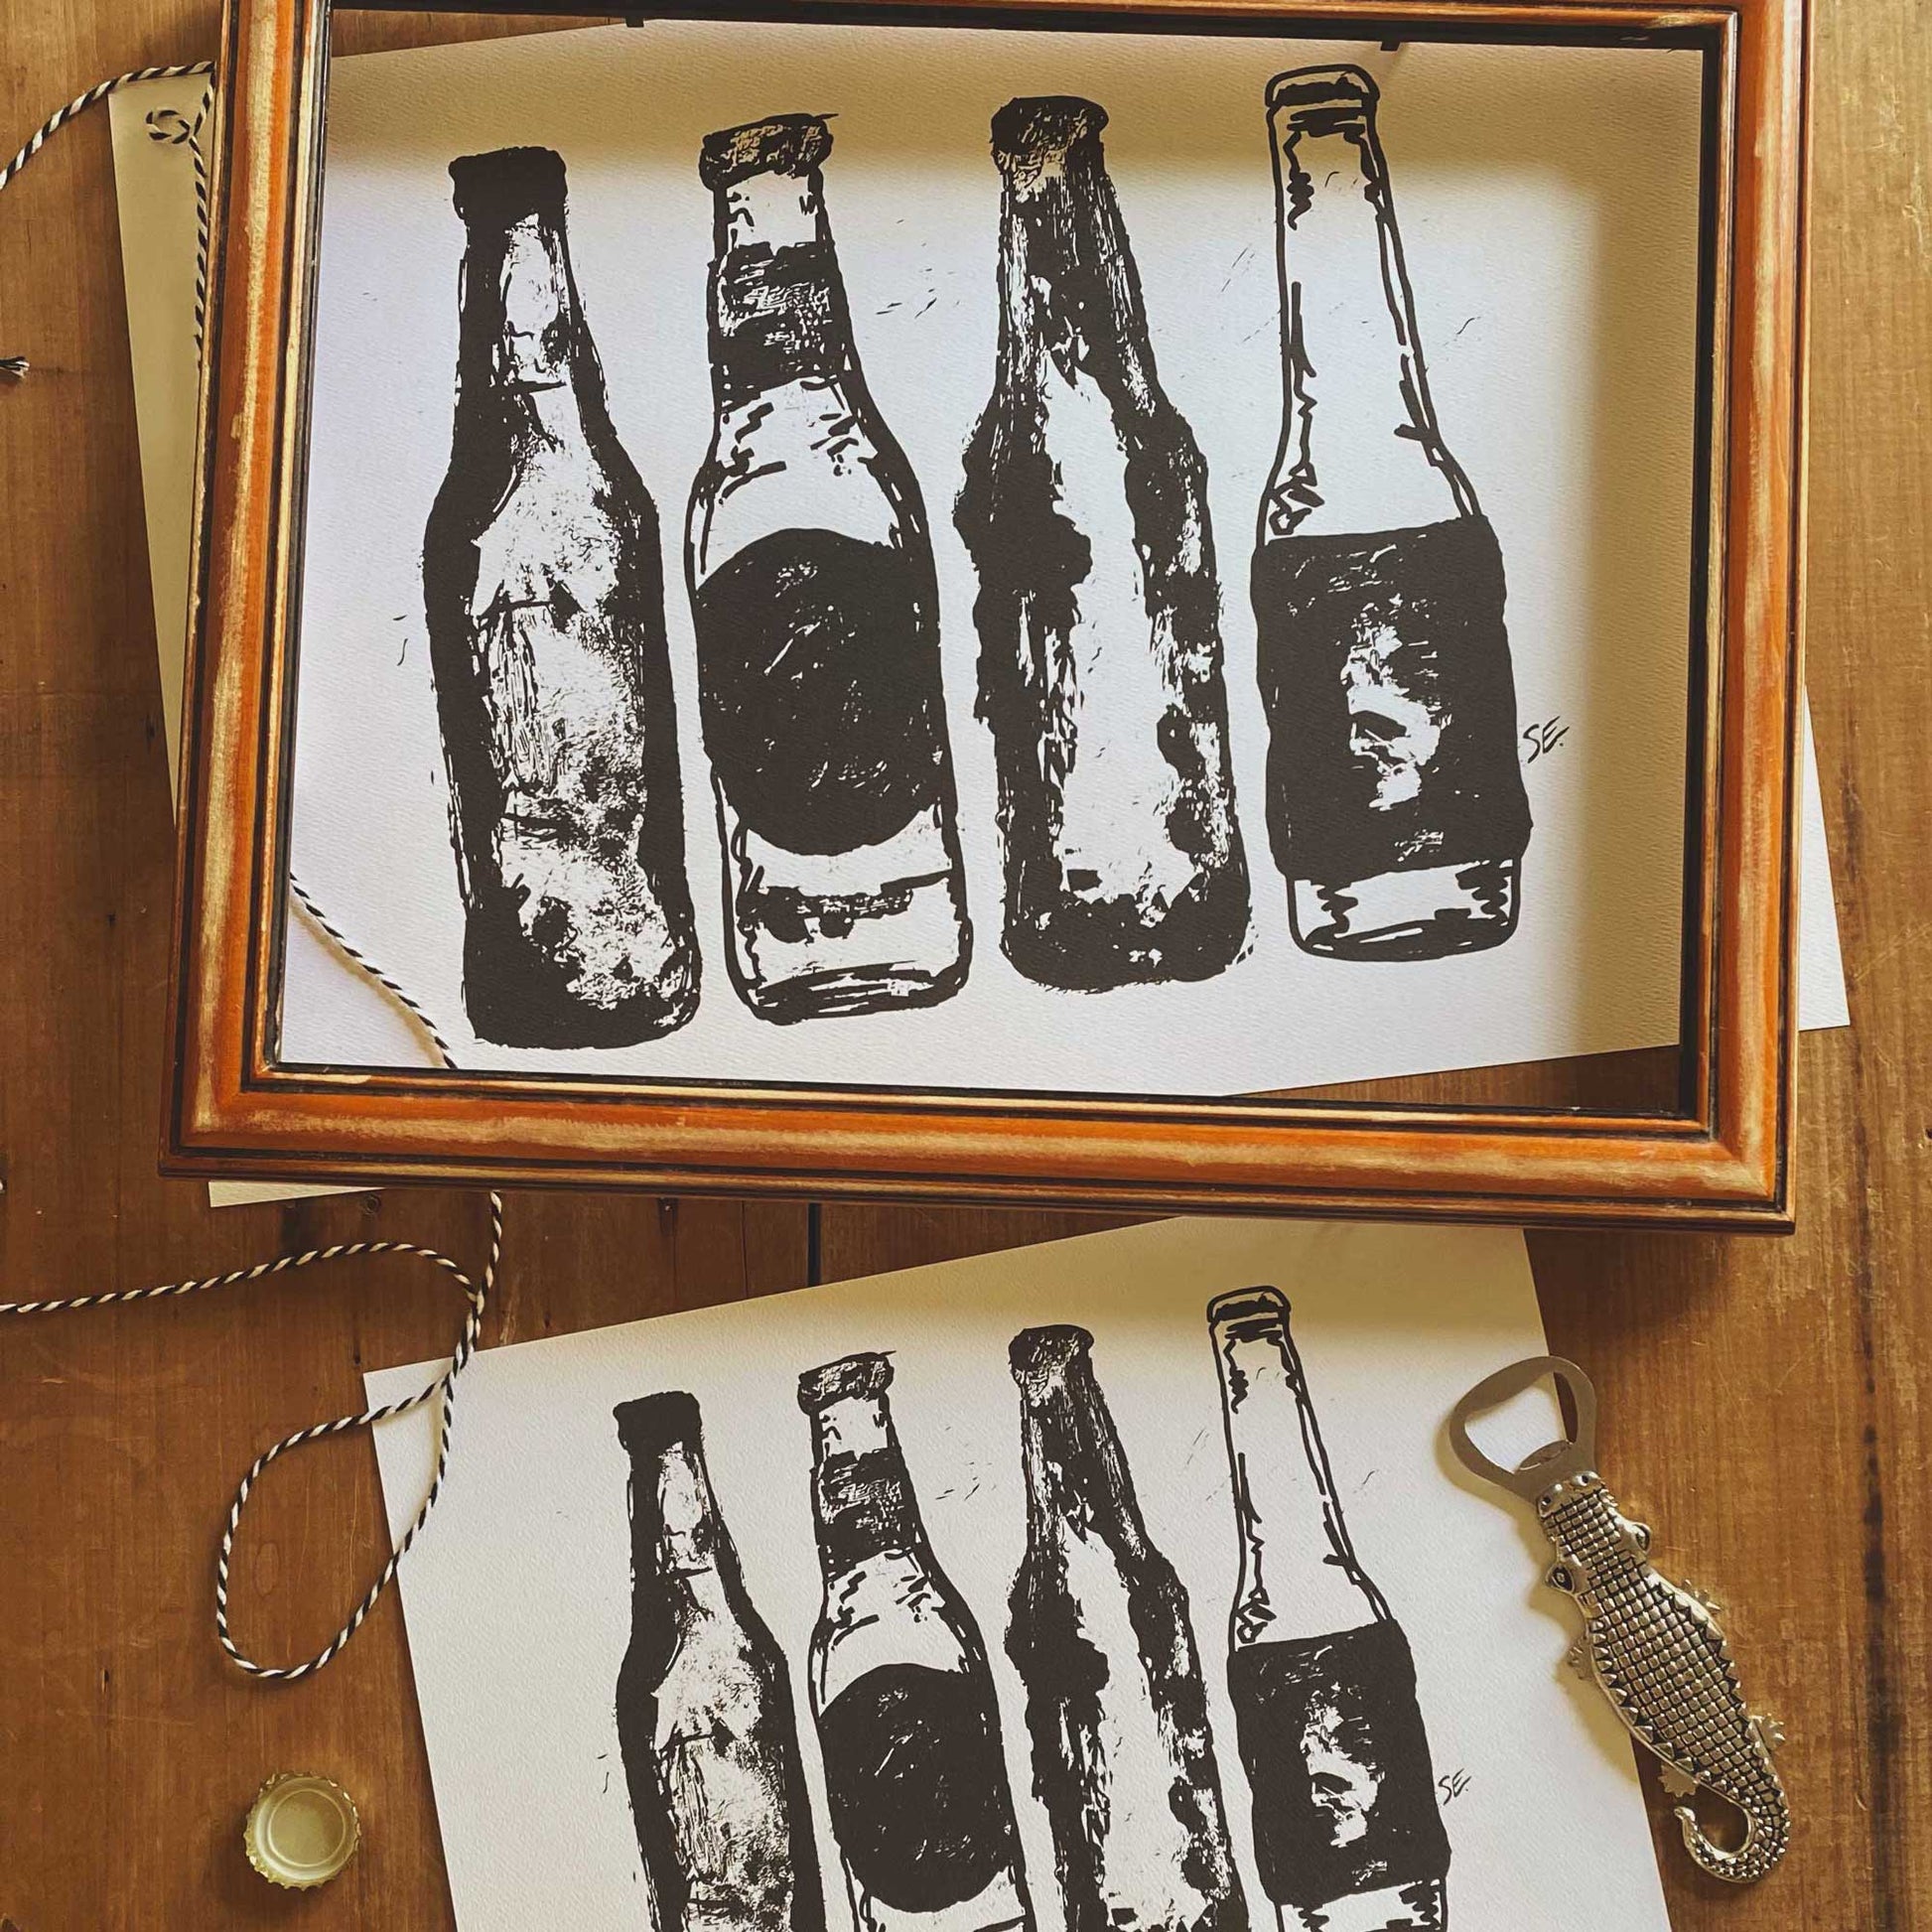 Beer Bottles On The Wall - Art Print A3 And A4 Options By Sheridan Eveline Artists